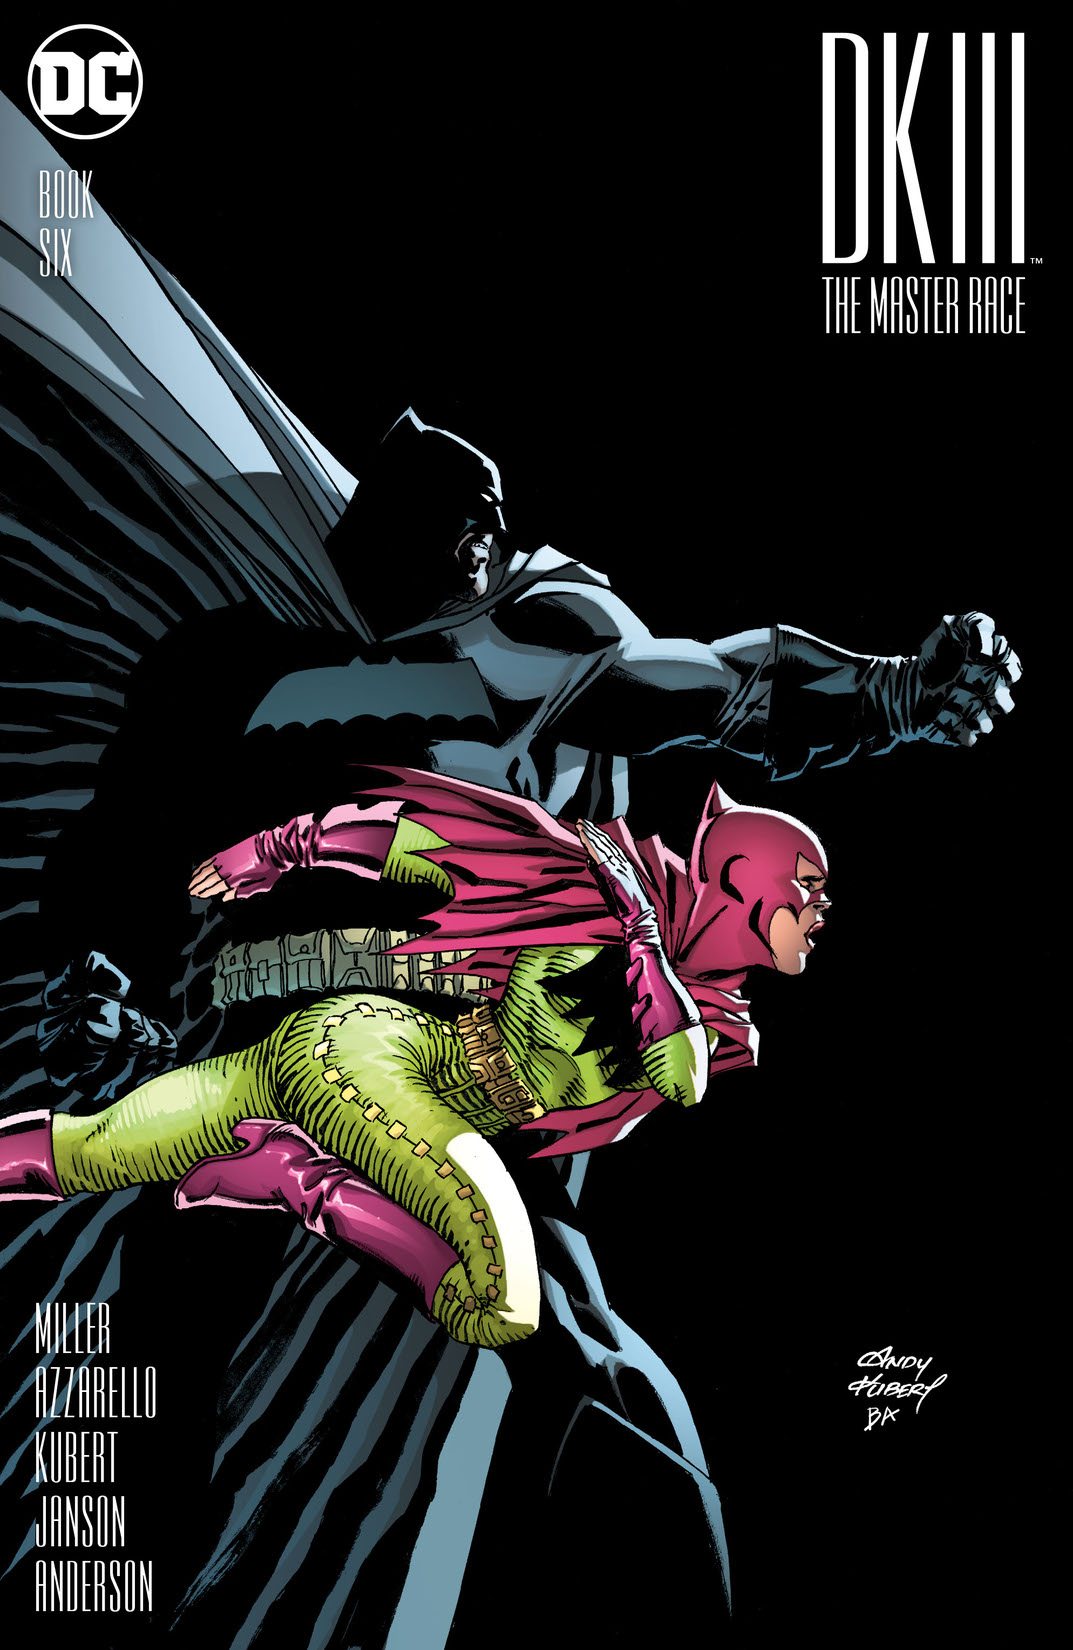 Dark Knight III: The Master Race #6 preview images